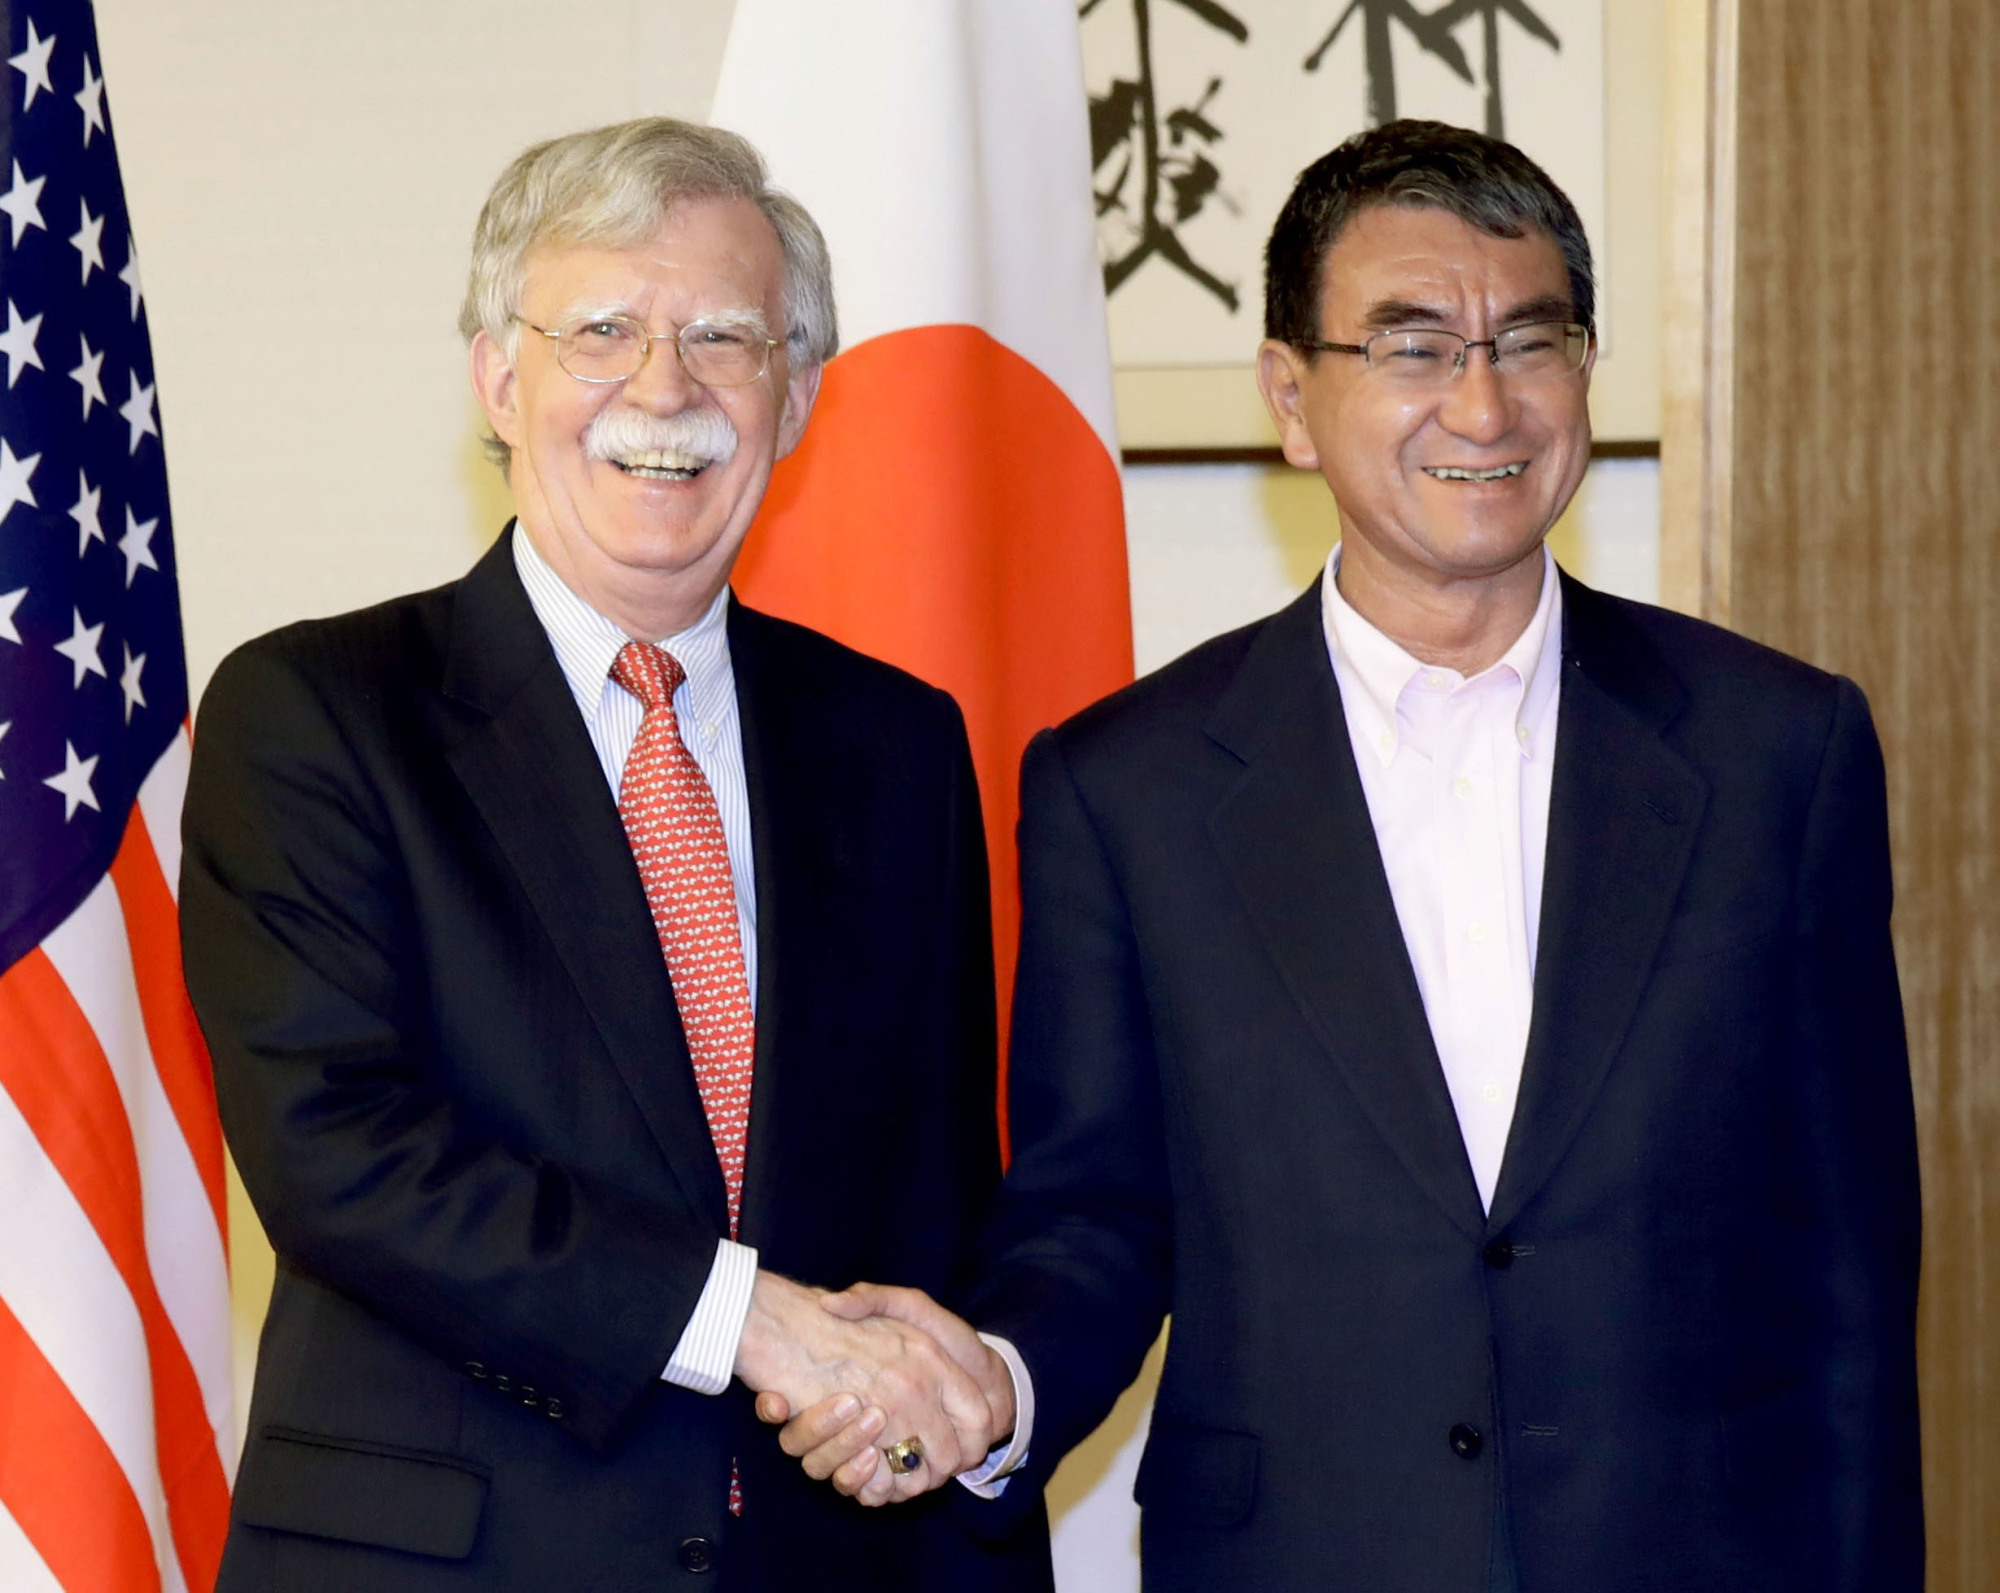 U.S. National Security Adviser John Bolton and Japanese Foreign Minister Taro Kono shake hands at the Foreign Ministry in Tokyo on Monday. | KYODO